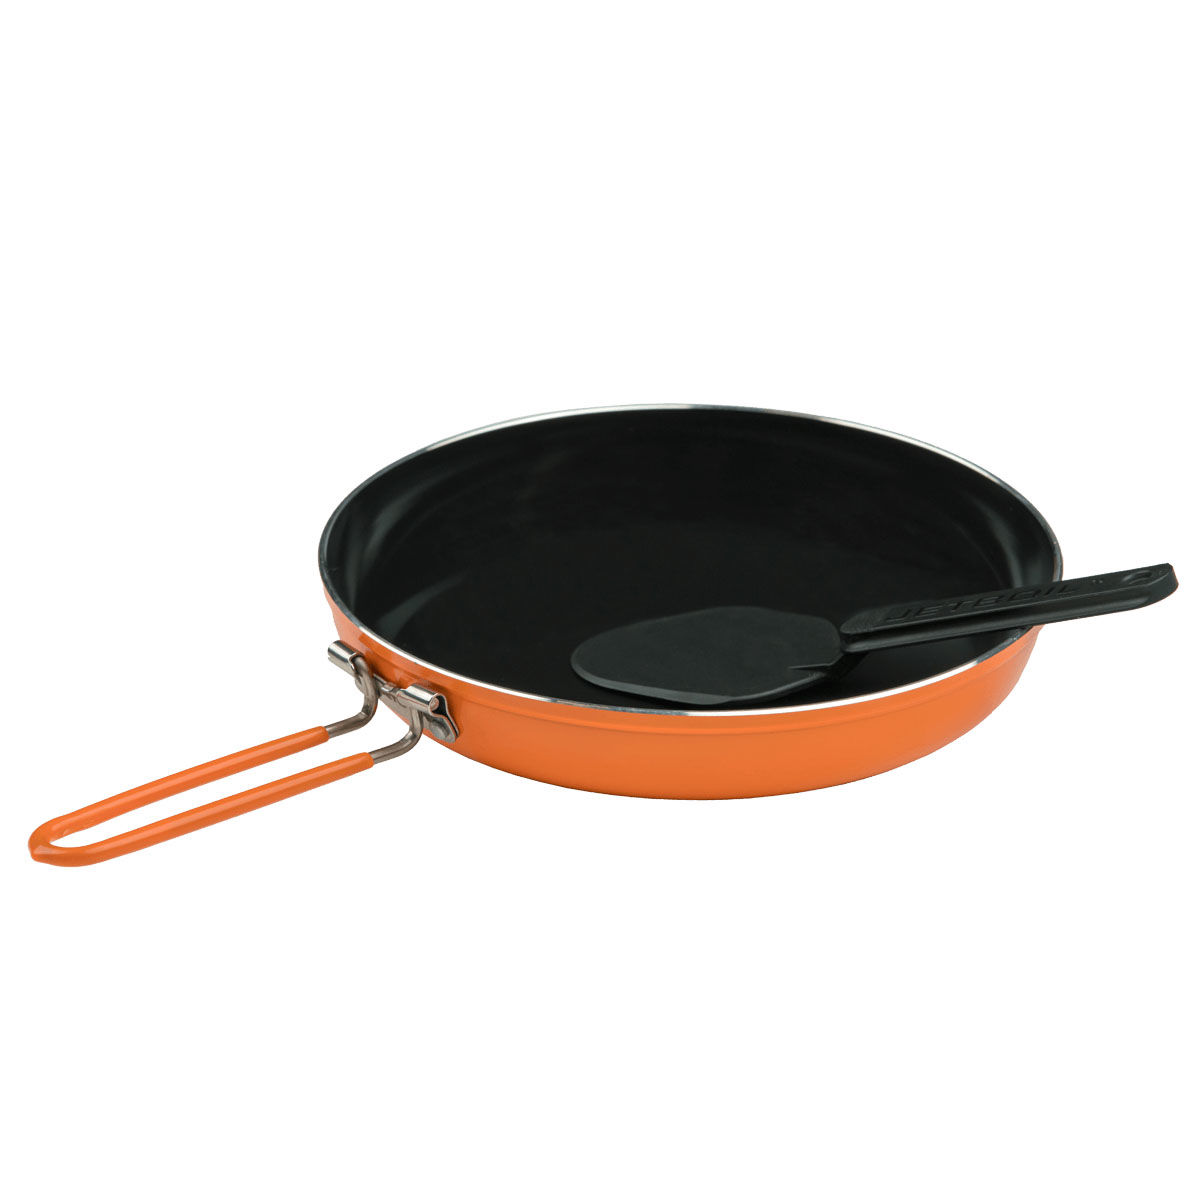 Jetboil summit skillet with spatula